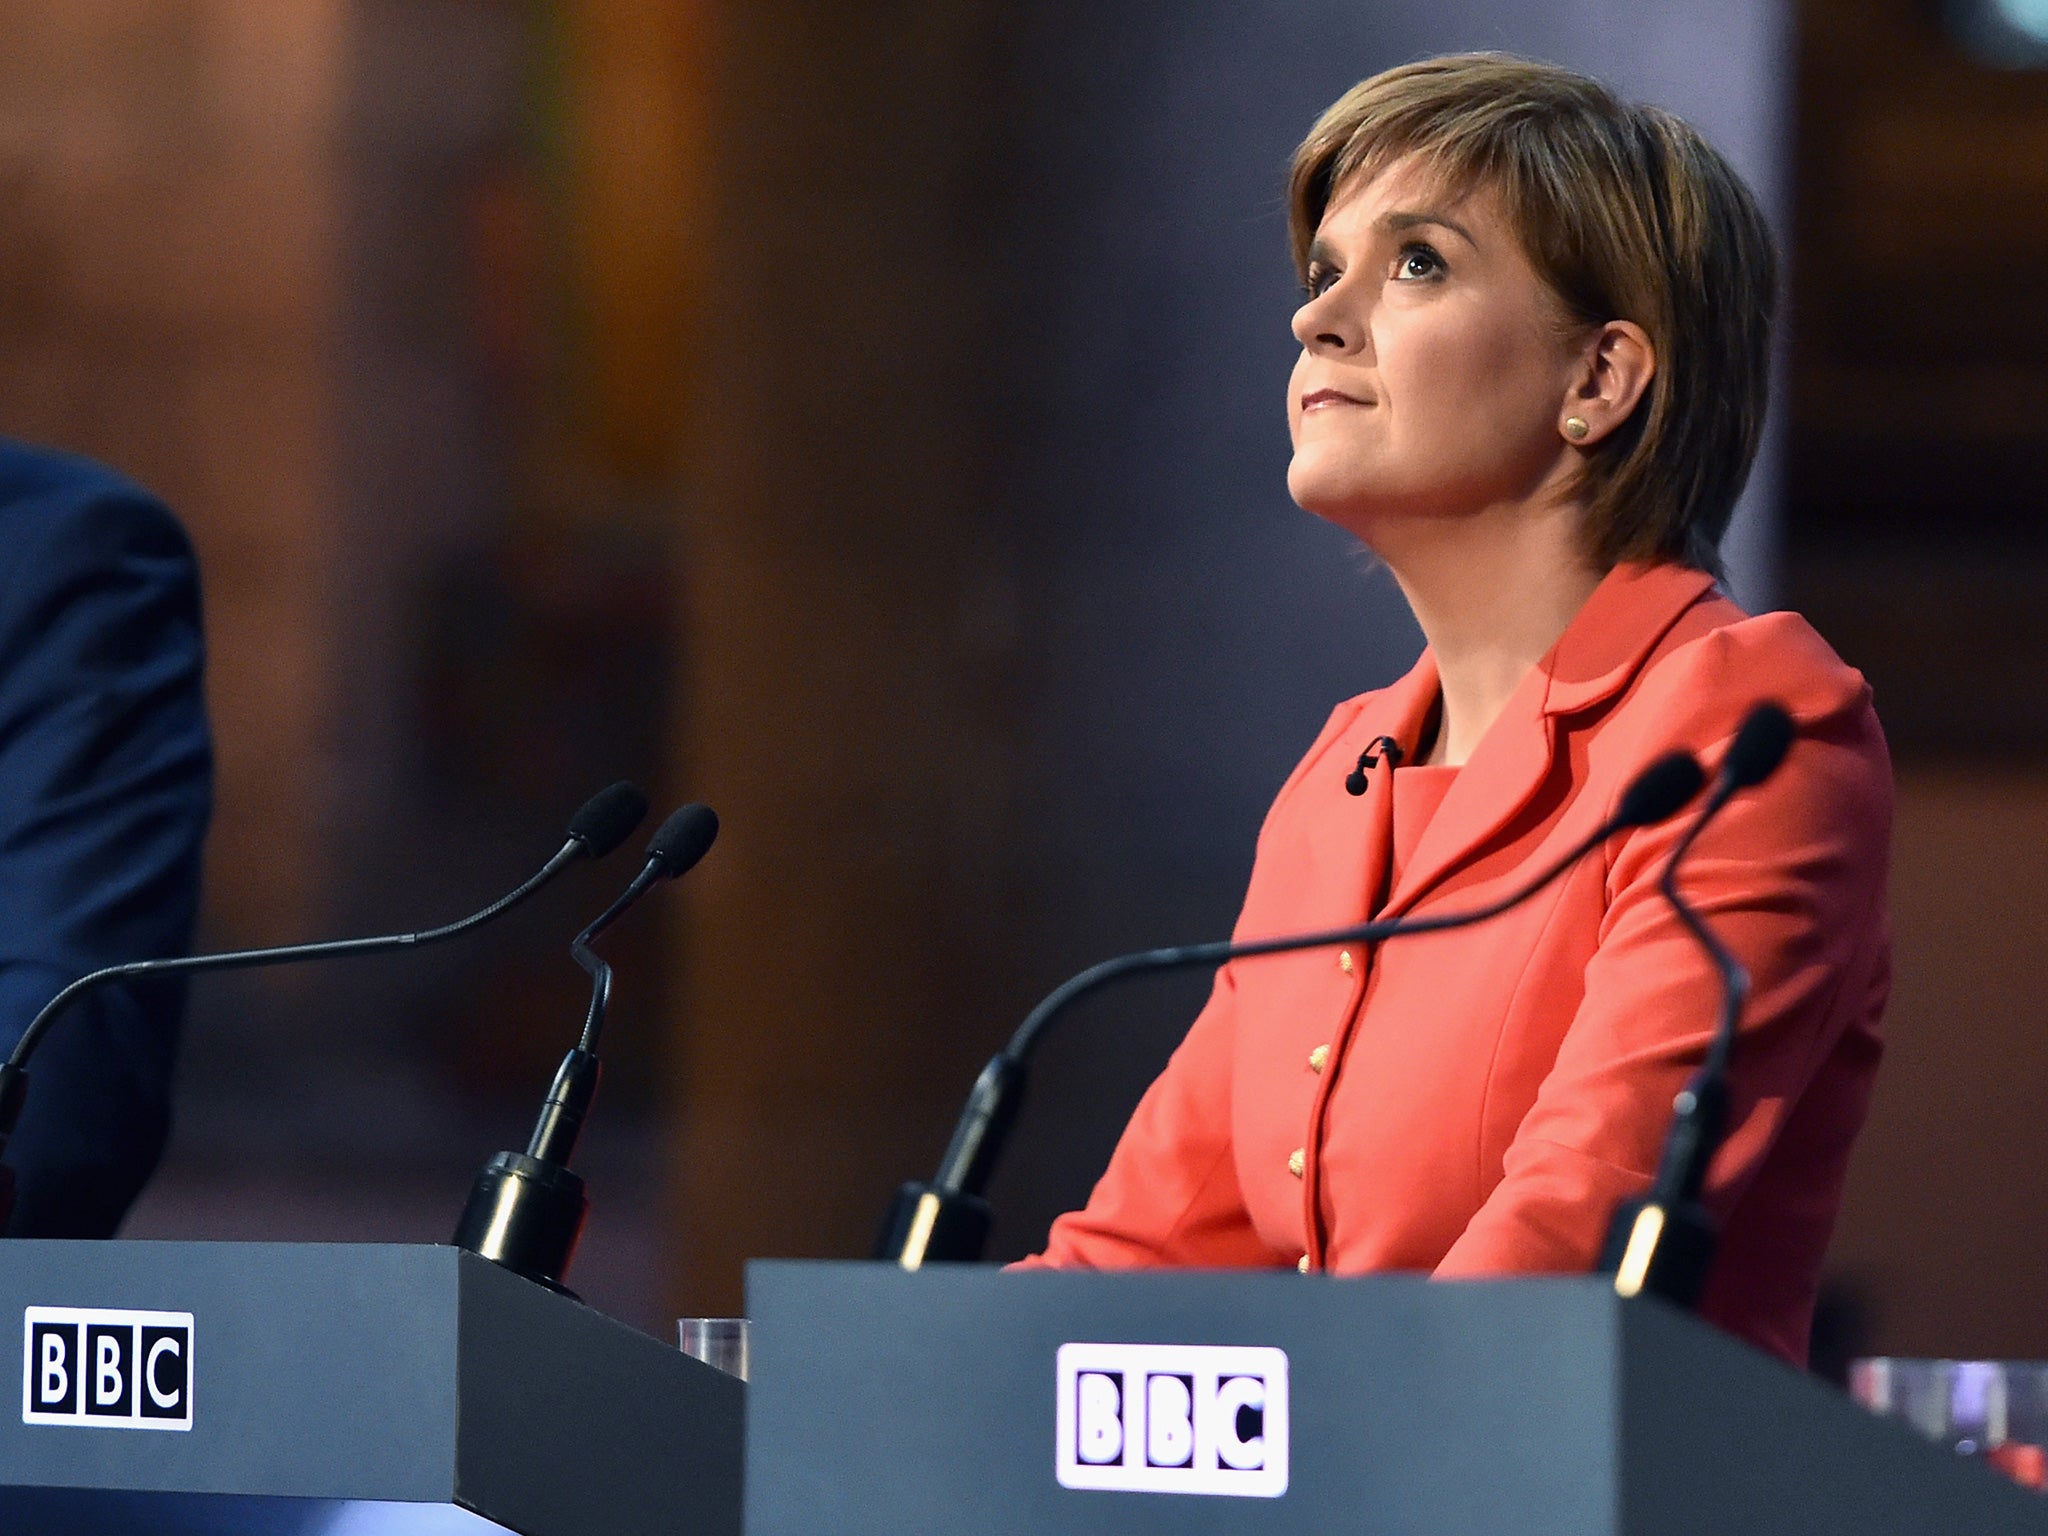 Sturgeon taking part in an electoral debate broadcast on the BBC